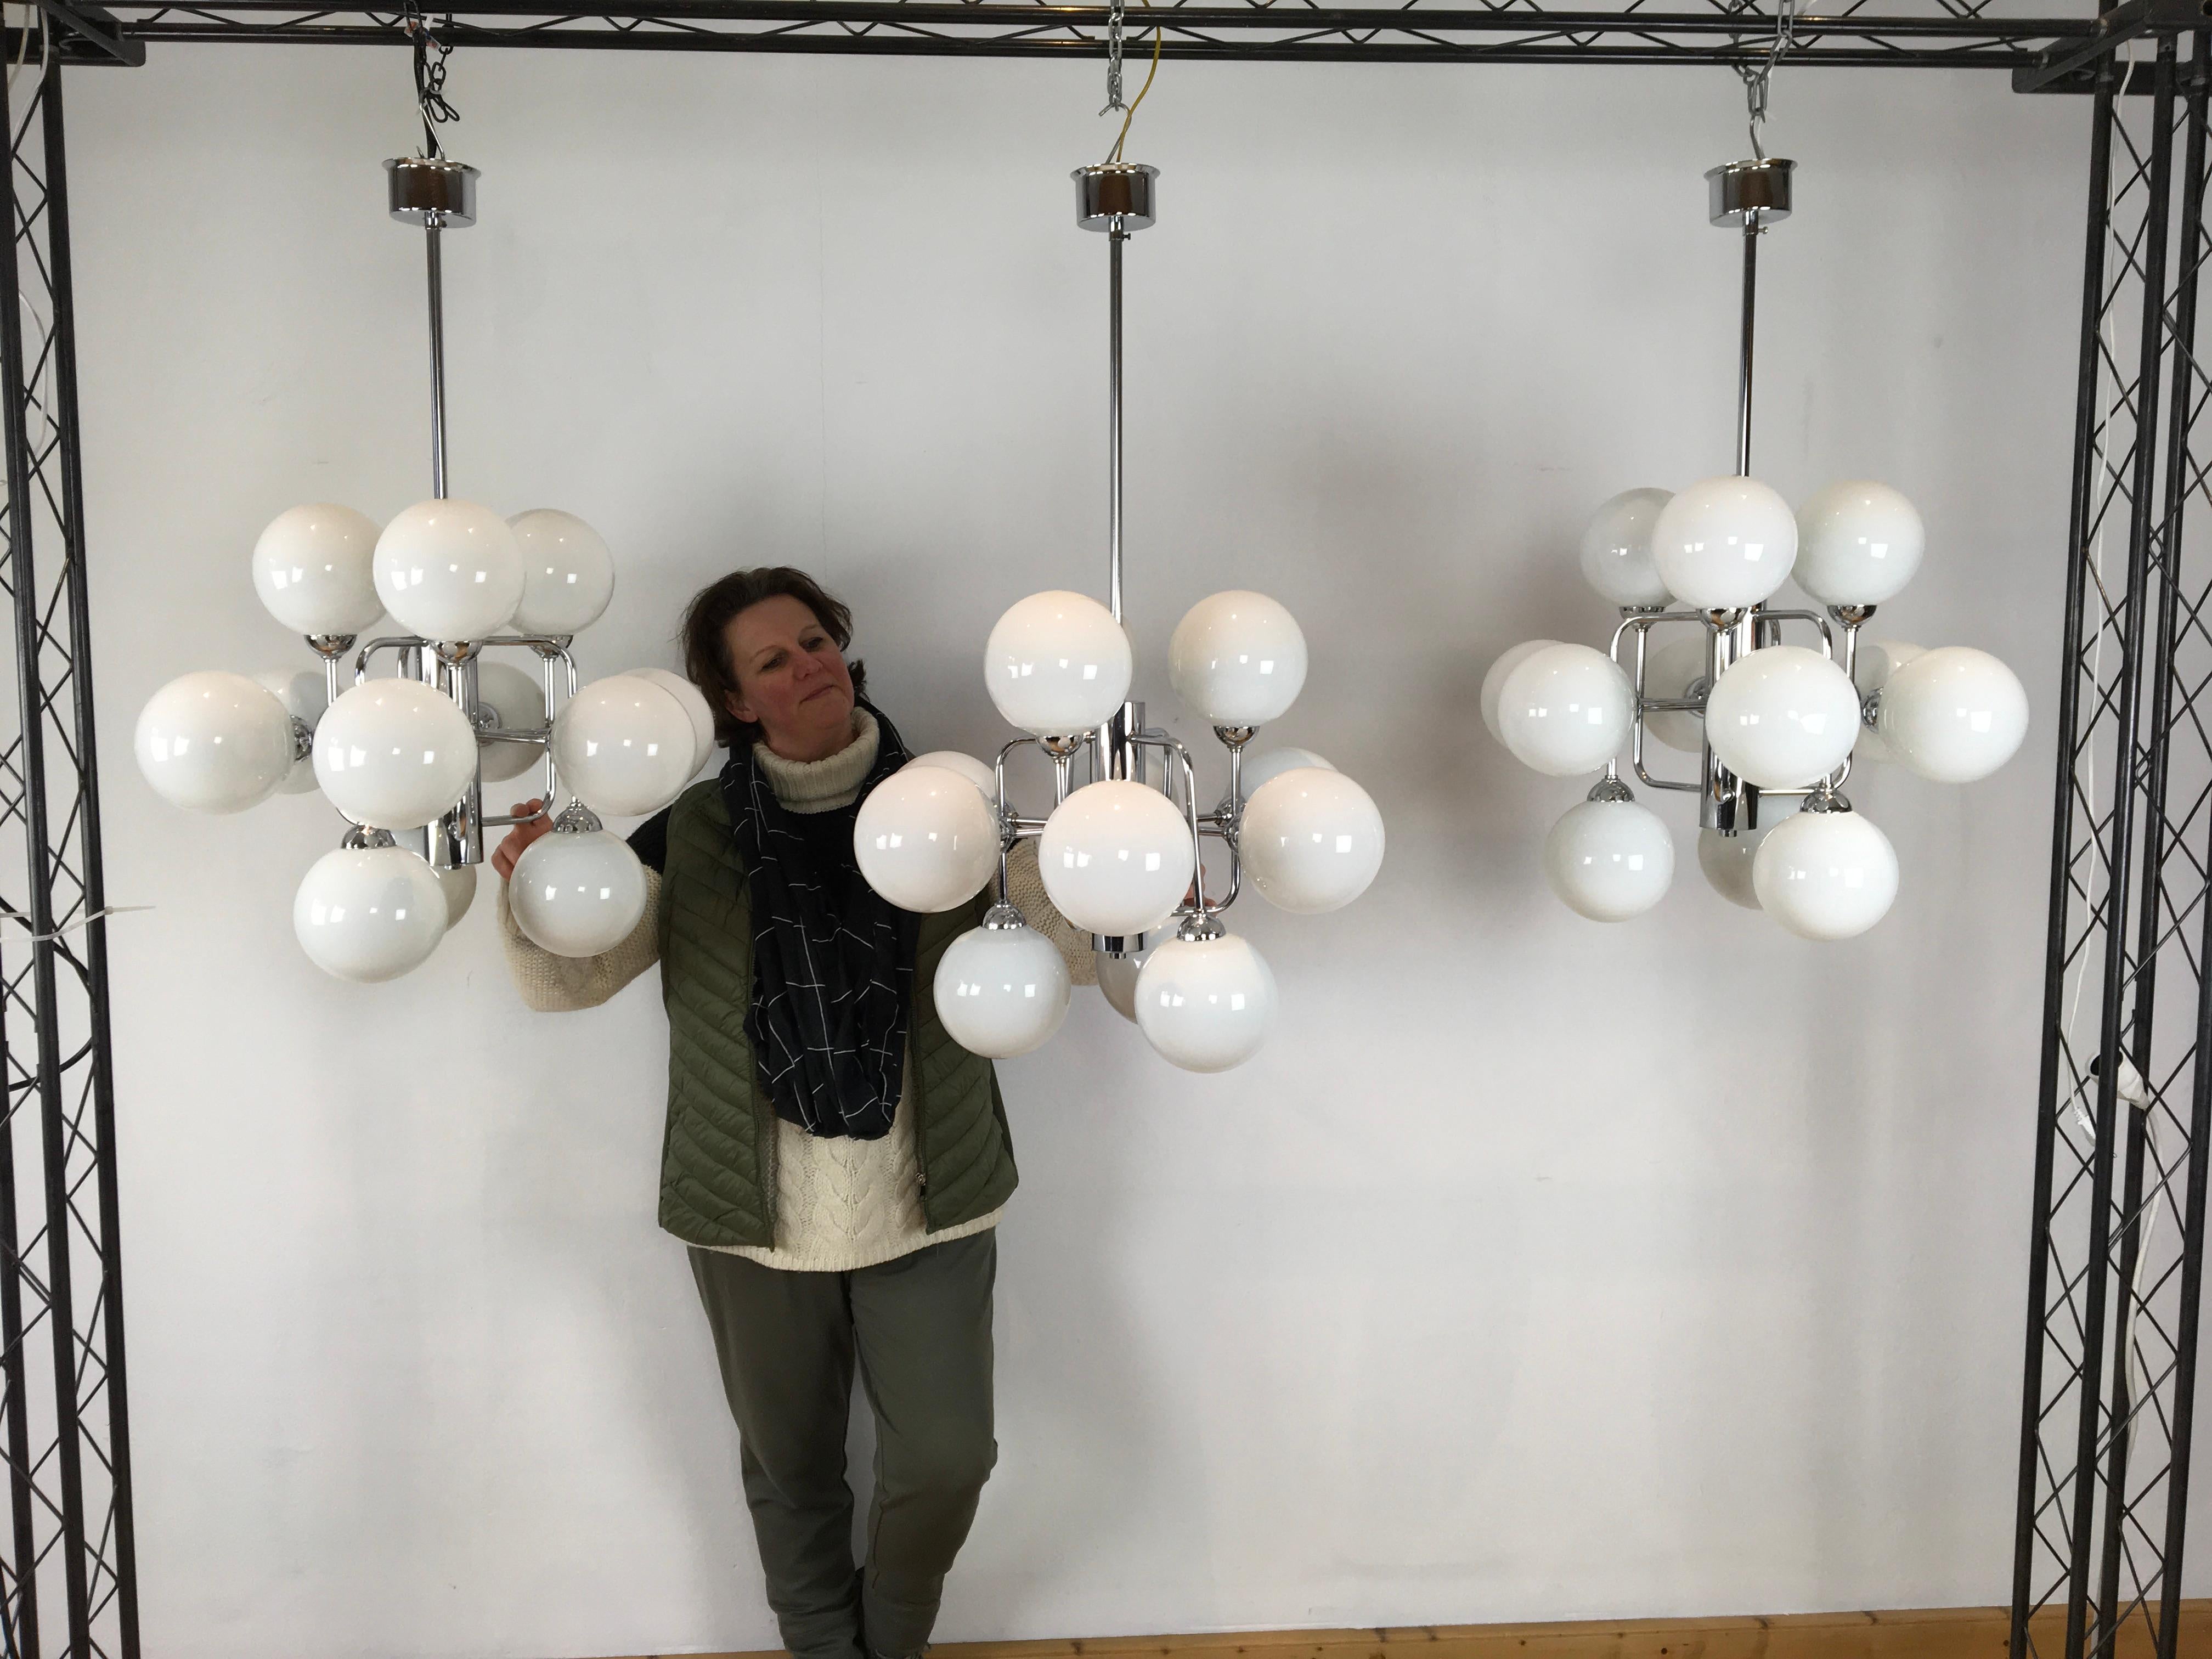 3 Midcentury atomic chandeliers with 12 handblown opaline glass globes.
12-armed molecular space age chandeliers with geometric - cubic chromed bases.
Chroom of these modern chandeliers is still in very beautiful and shiny condition.

These